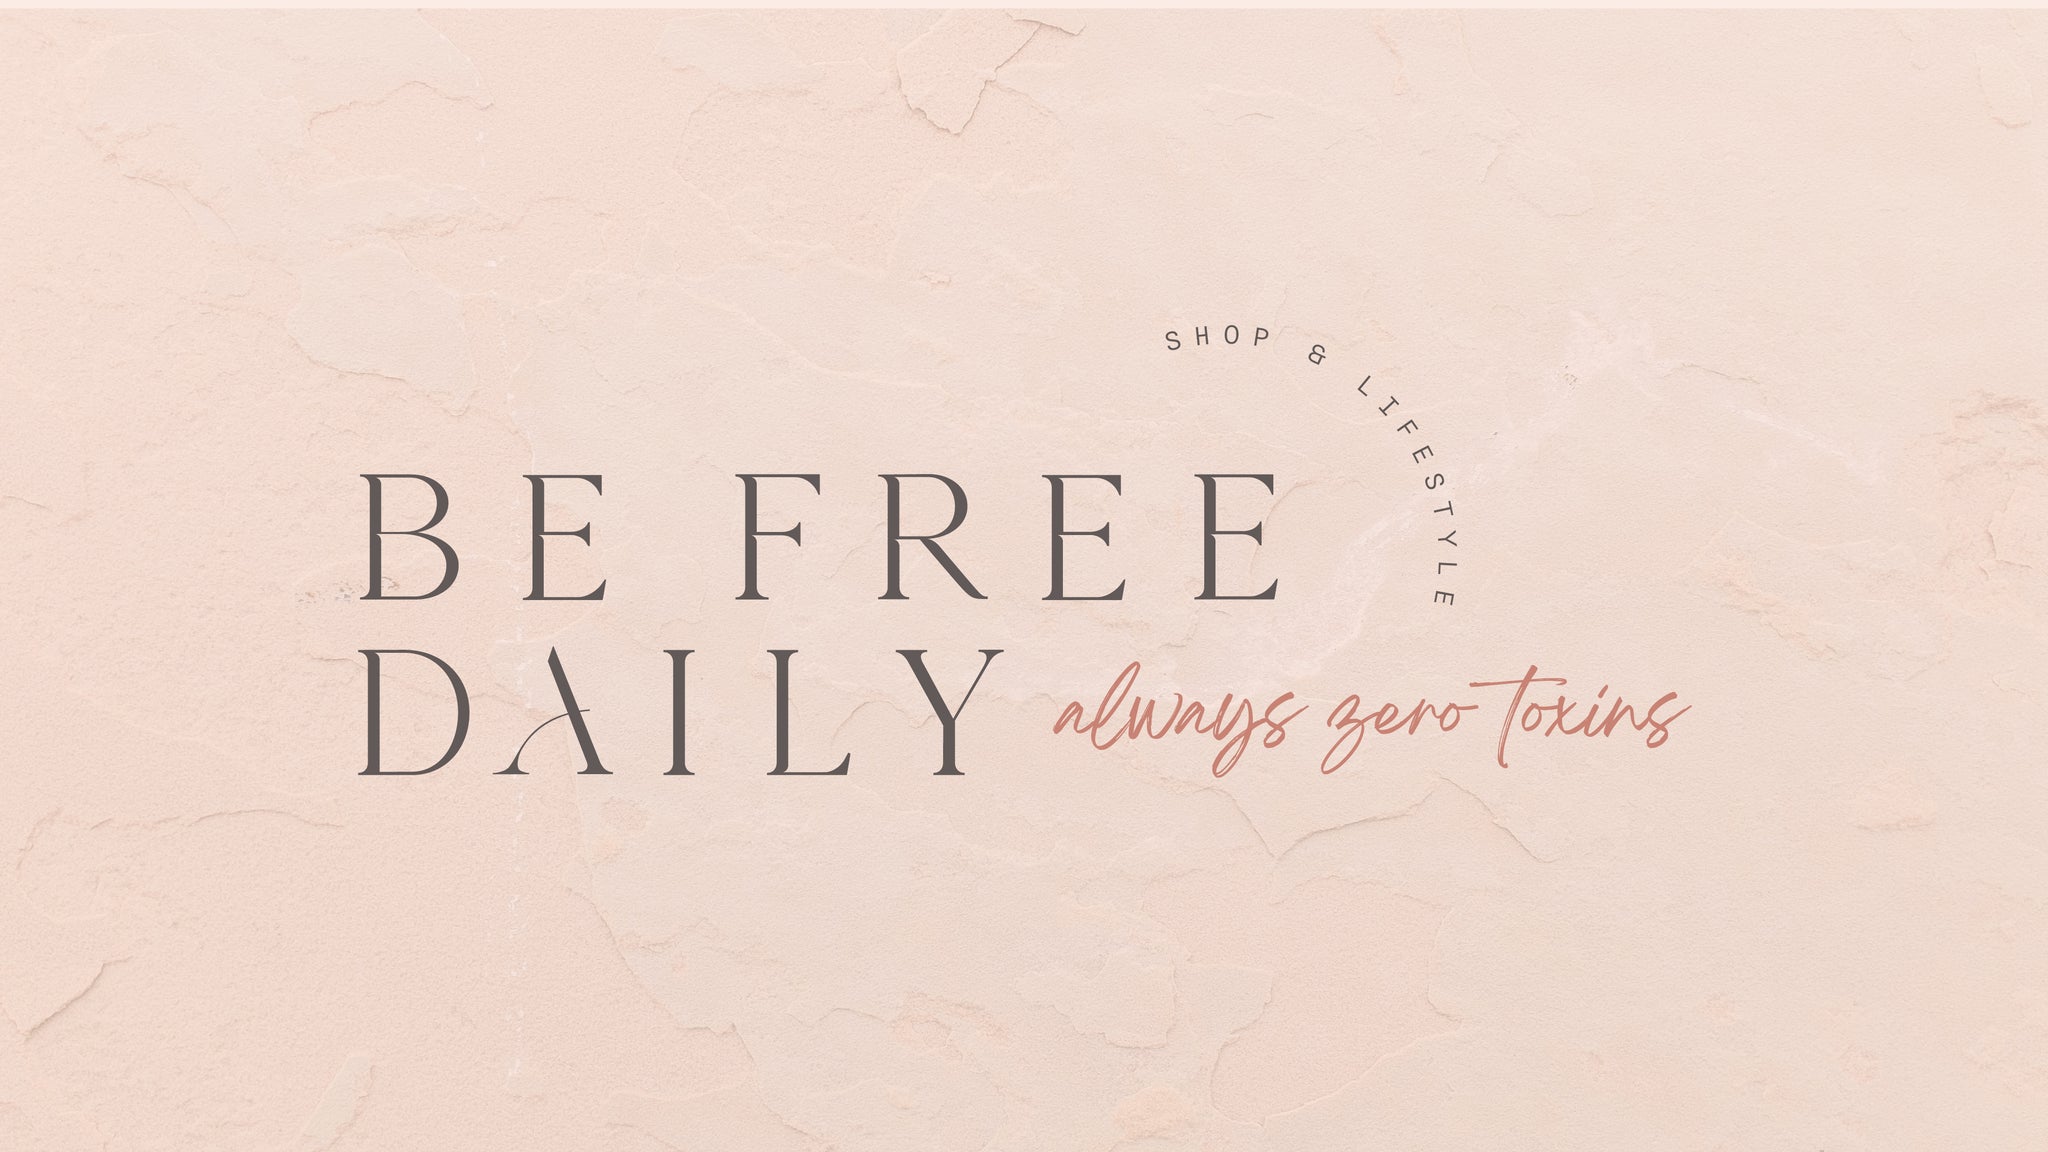 Be Free Daily, Shop & Lifestyle